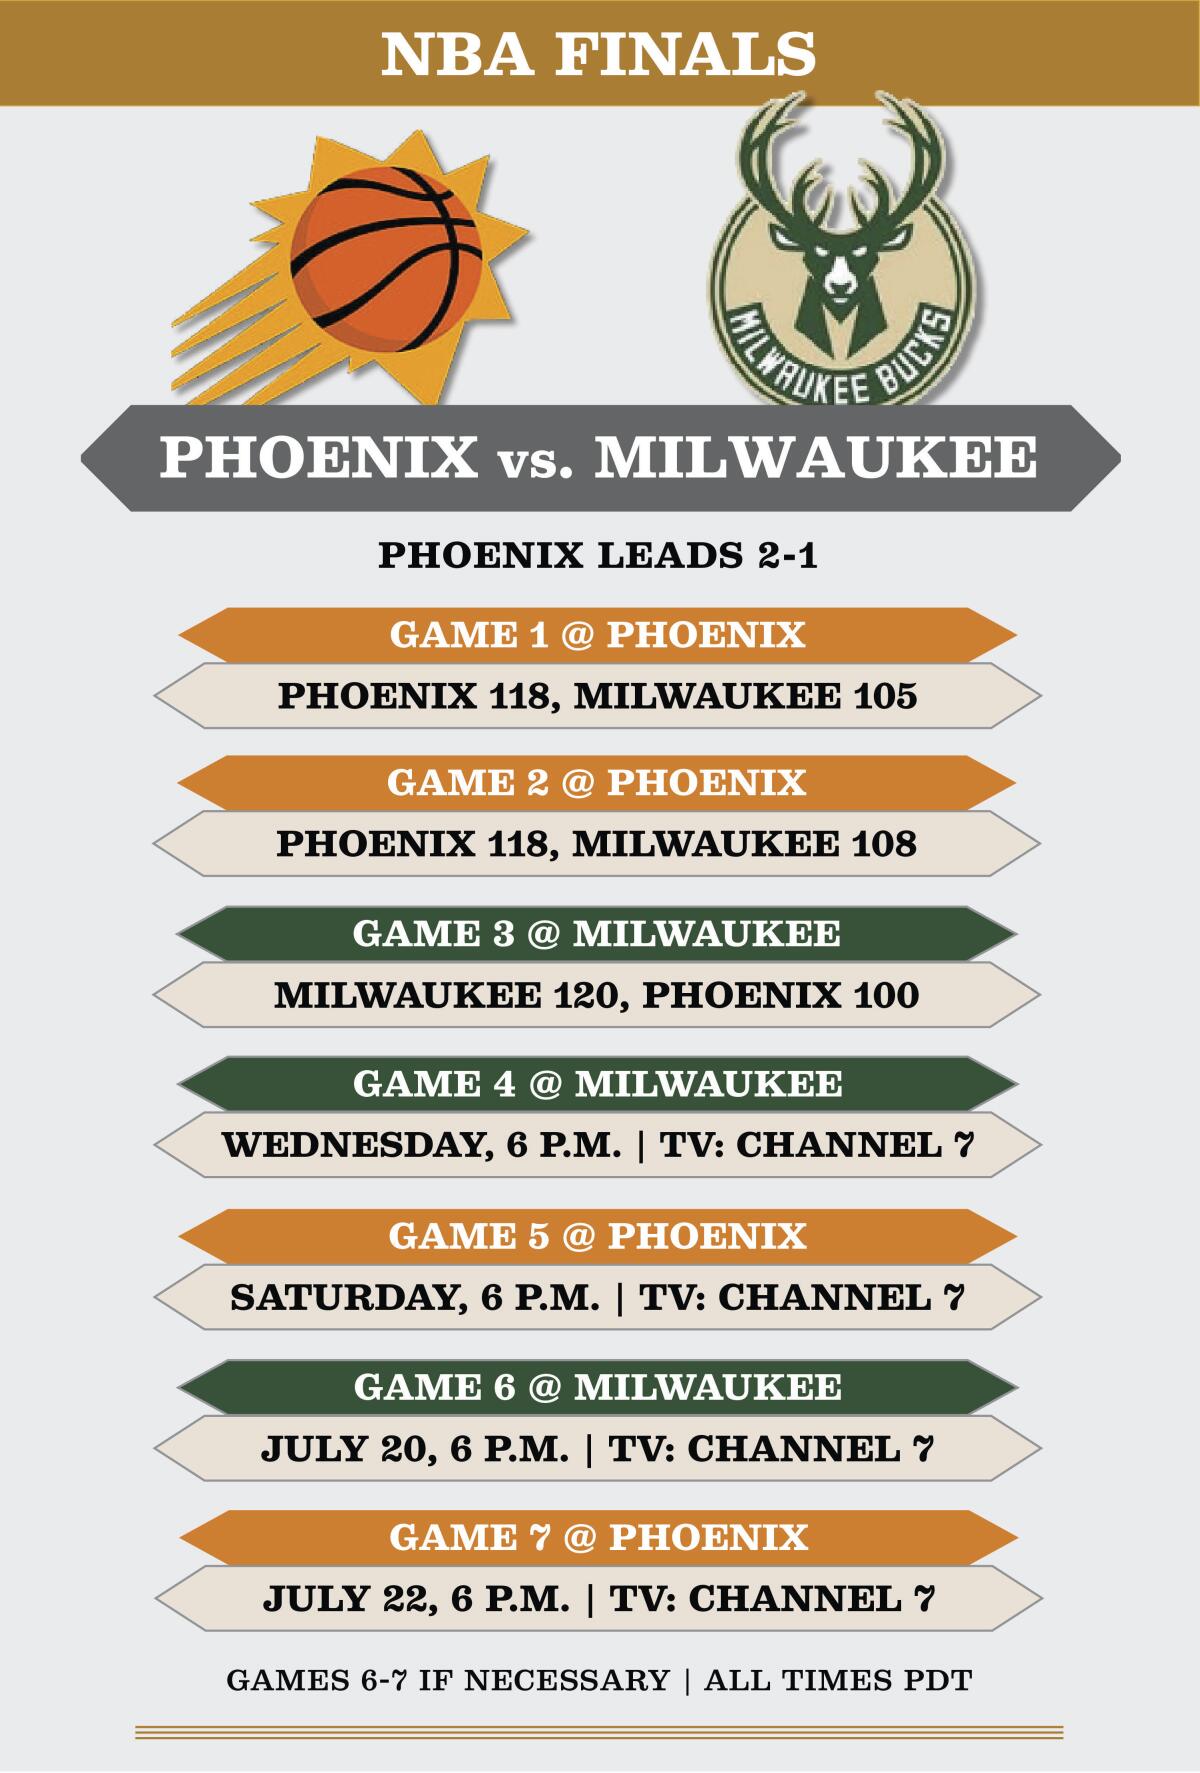 The Phoenix Suns took a 2-0 series lead in the NBA Finals on Thursday against the Milwaukee Bucks.